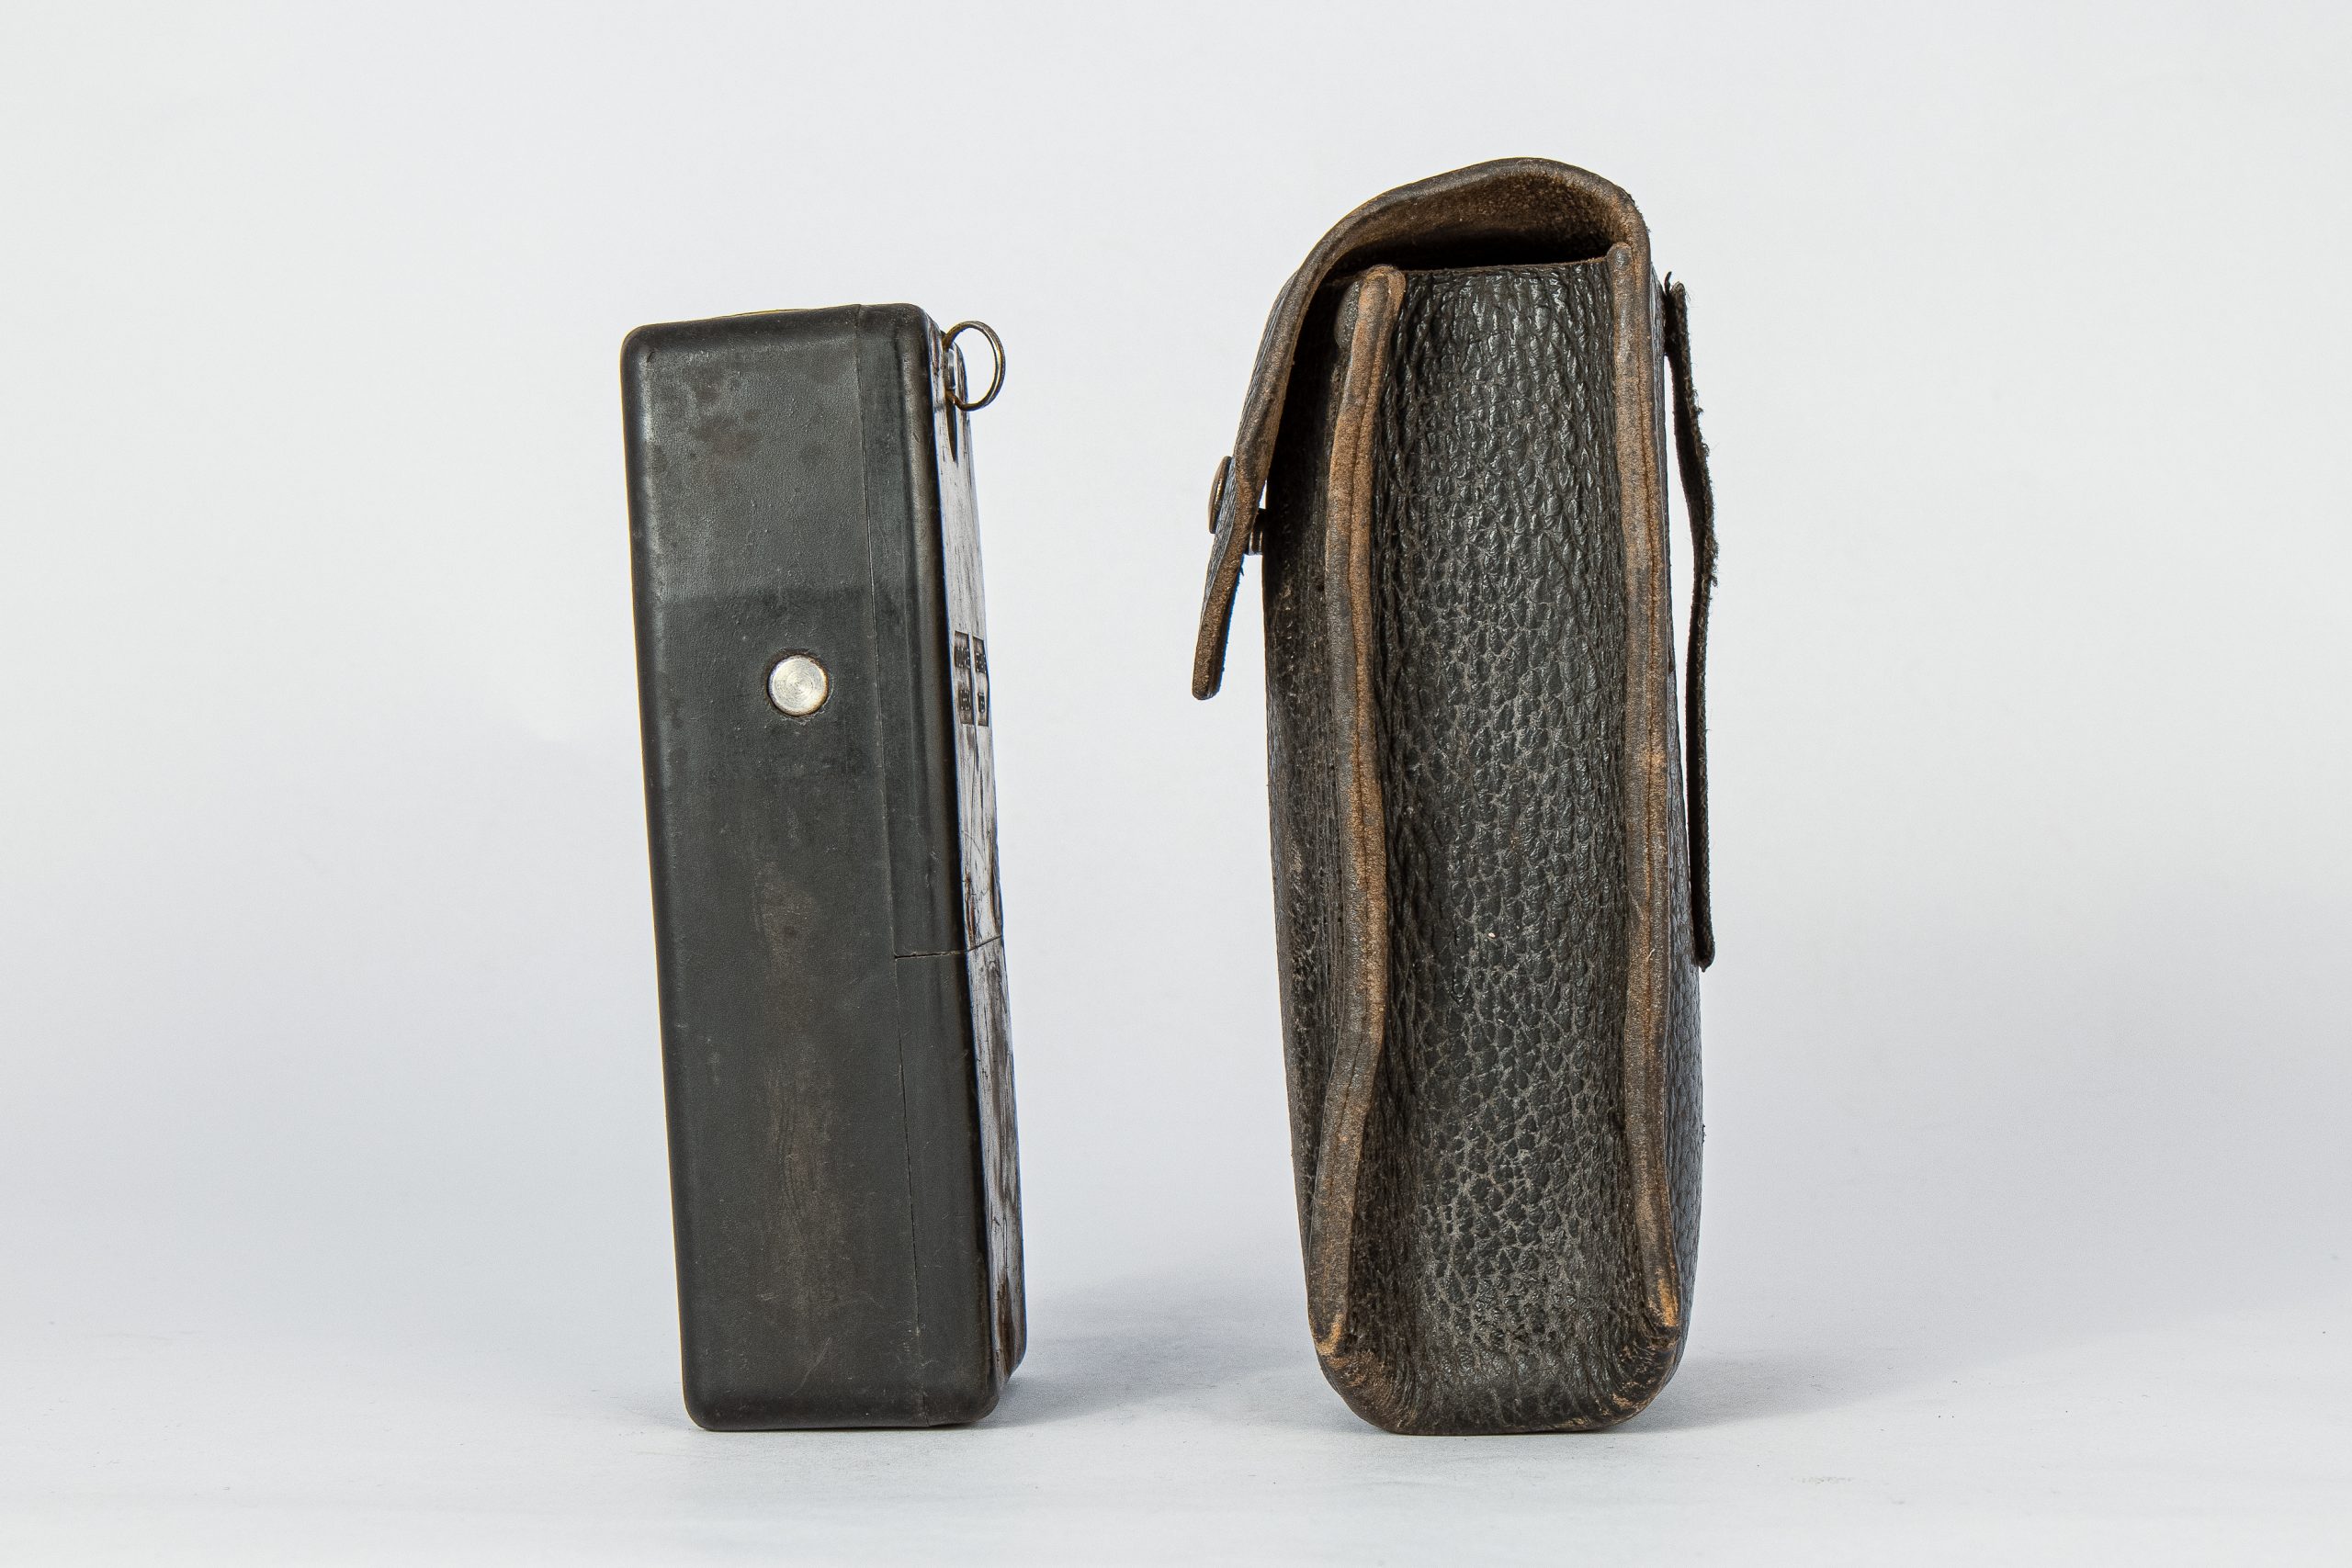 Side of device shaped like an old Nokia mobile phone. Beside it is a leather pouch to hold the device.